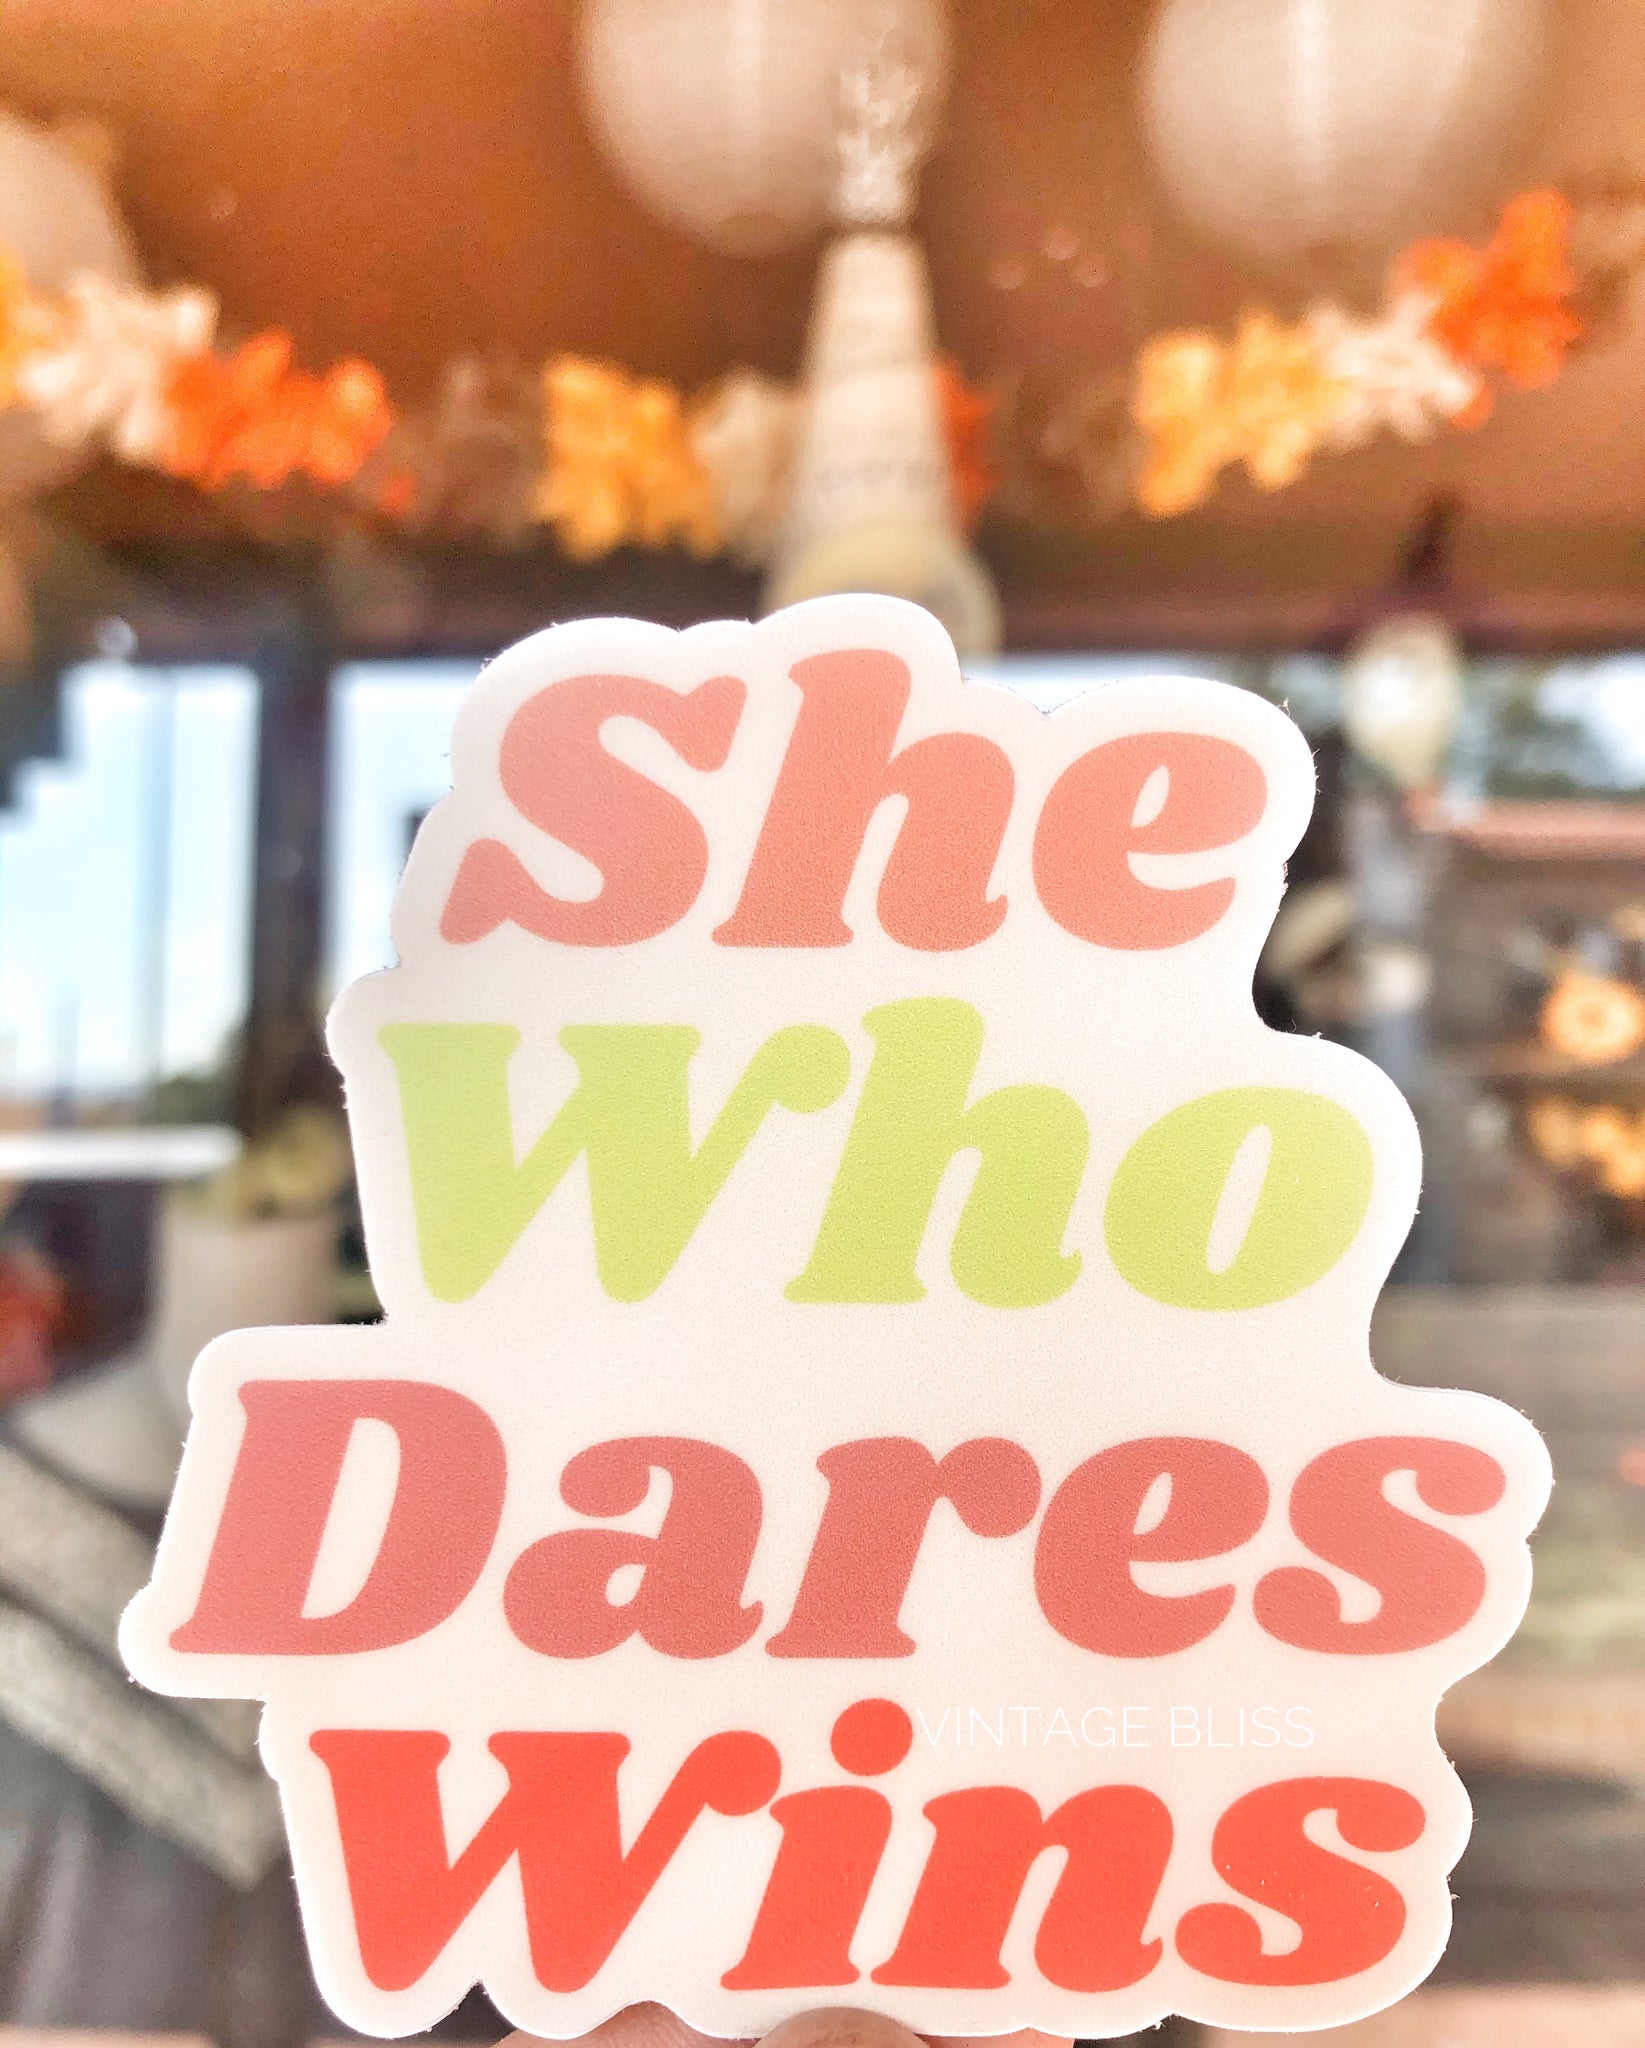 She Who Dares Wins